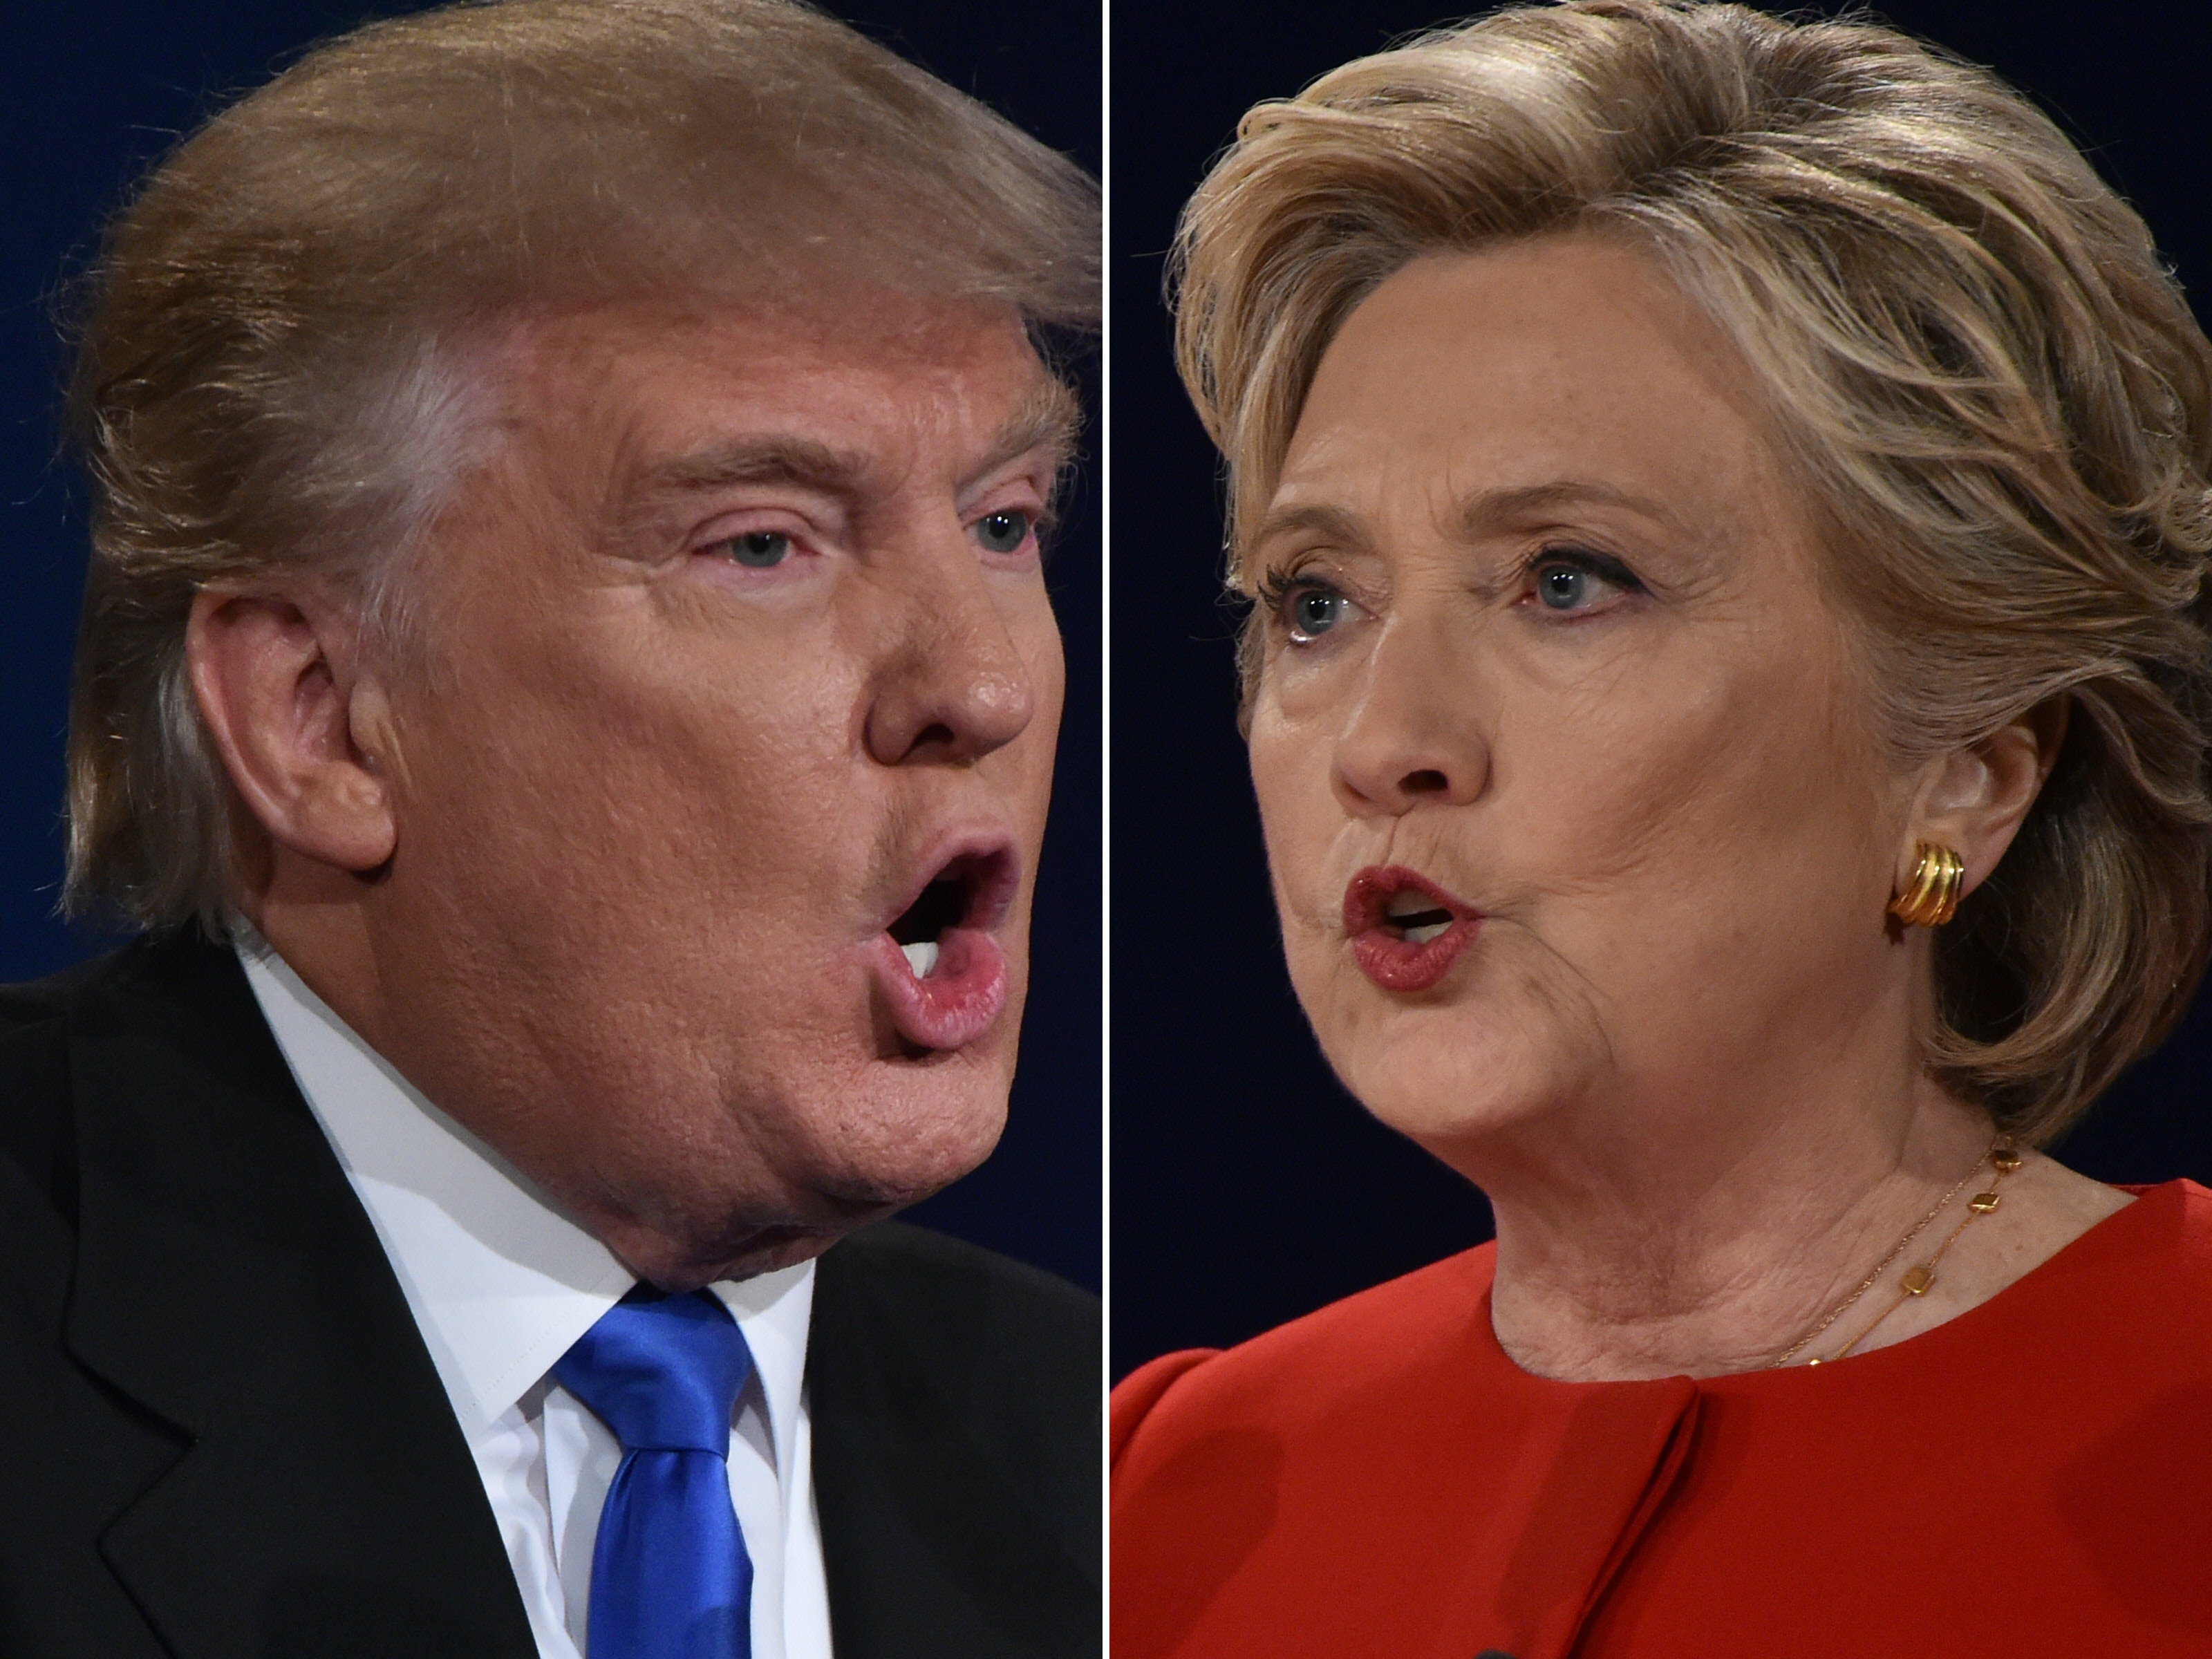 Republican nominee Donald Trump and Democratic nominee Hillary Clinton face off during the first presidential debate at Hofstra University in Hempstead, N.Y., on Sept. 26, 2016.